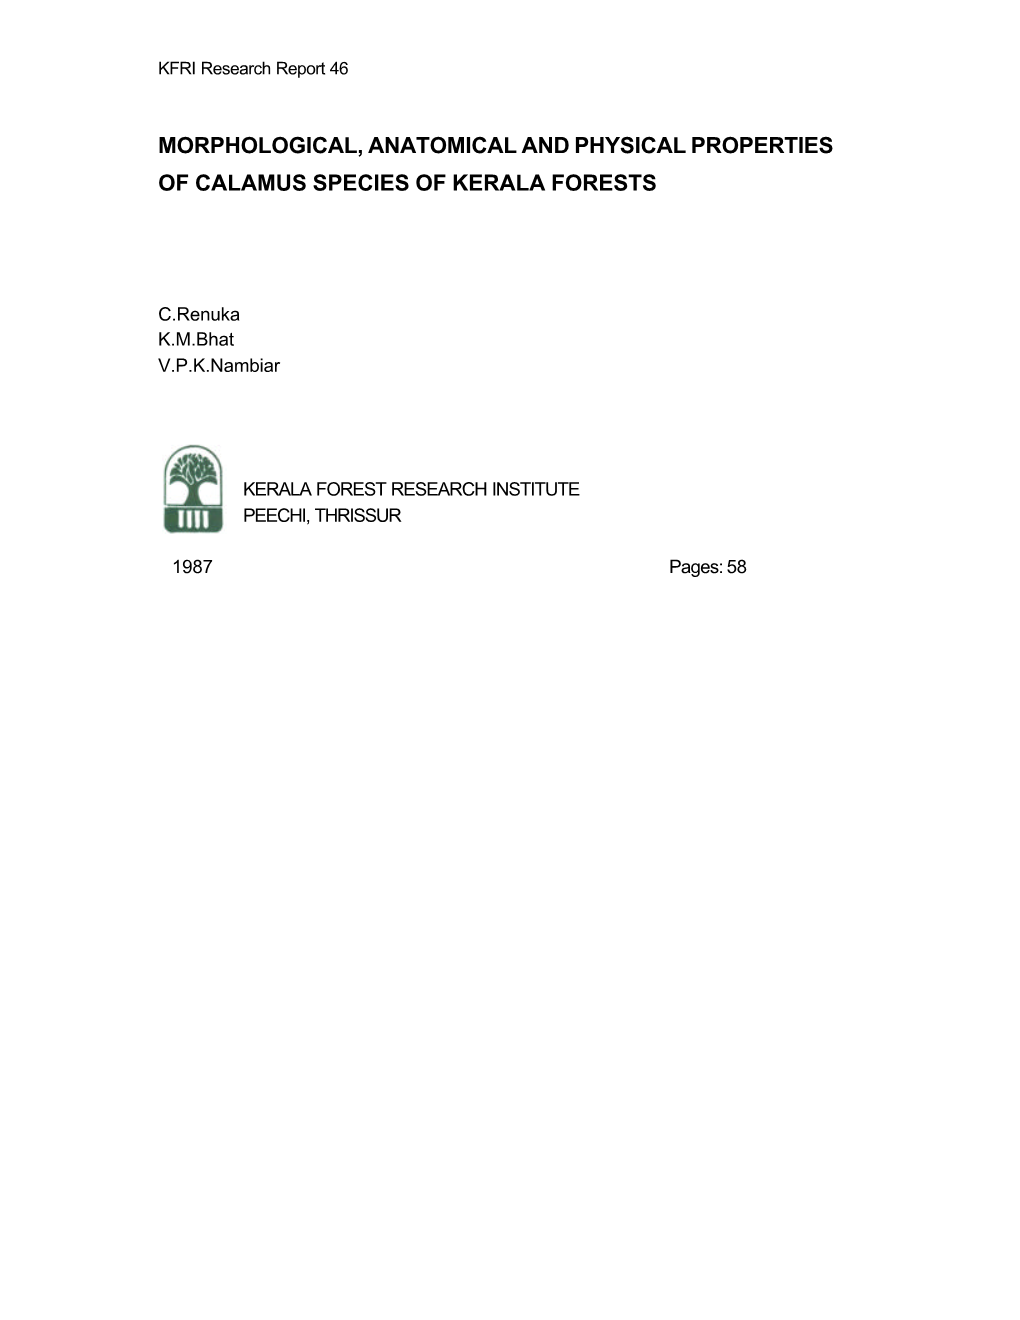 Morphological, Anatomical and Physical Properties of Calamus Species of Kerala Forests